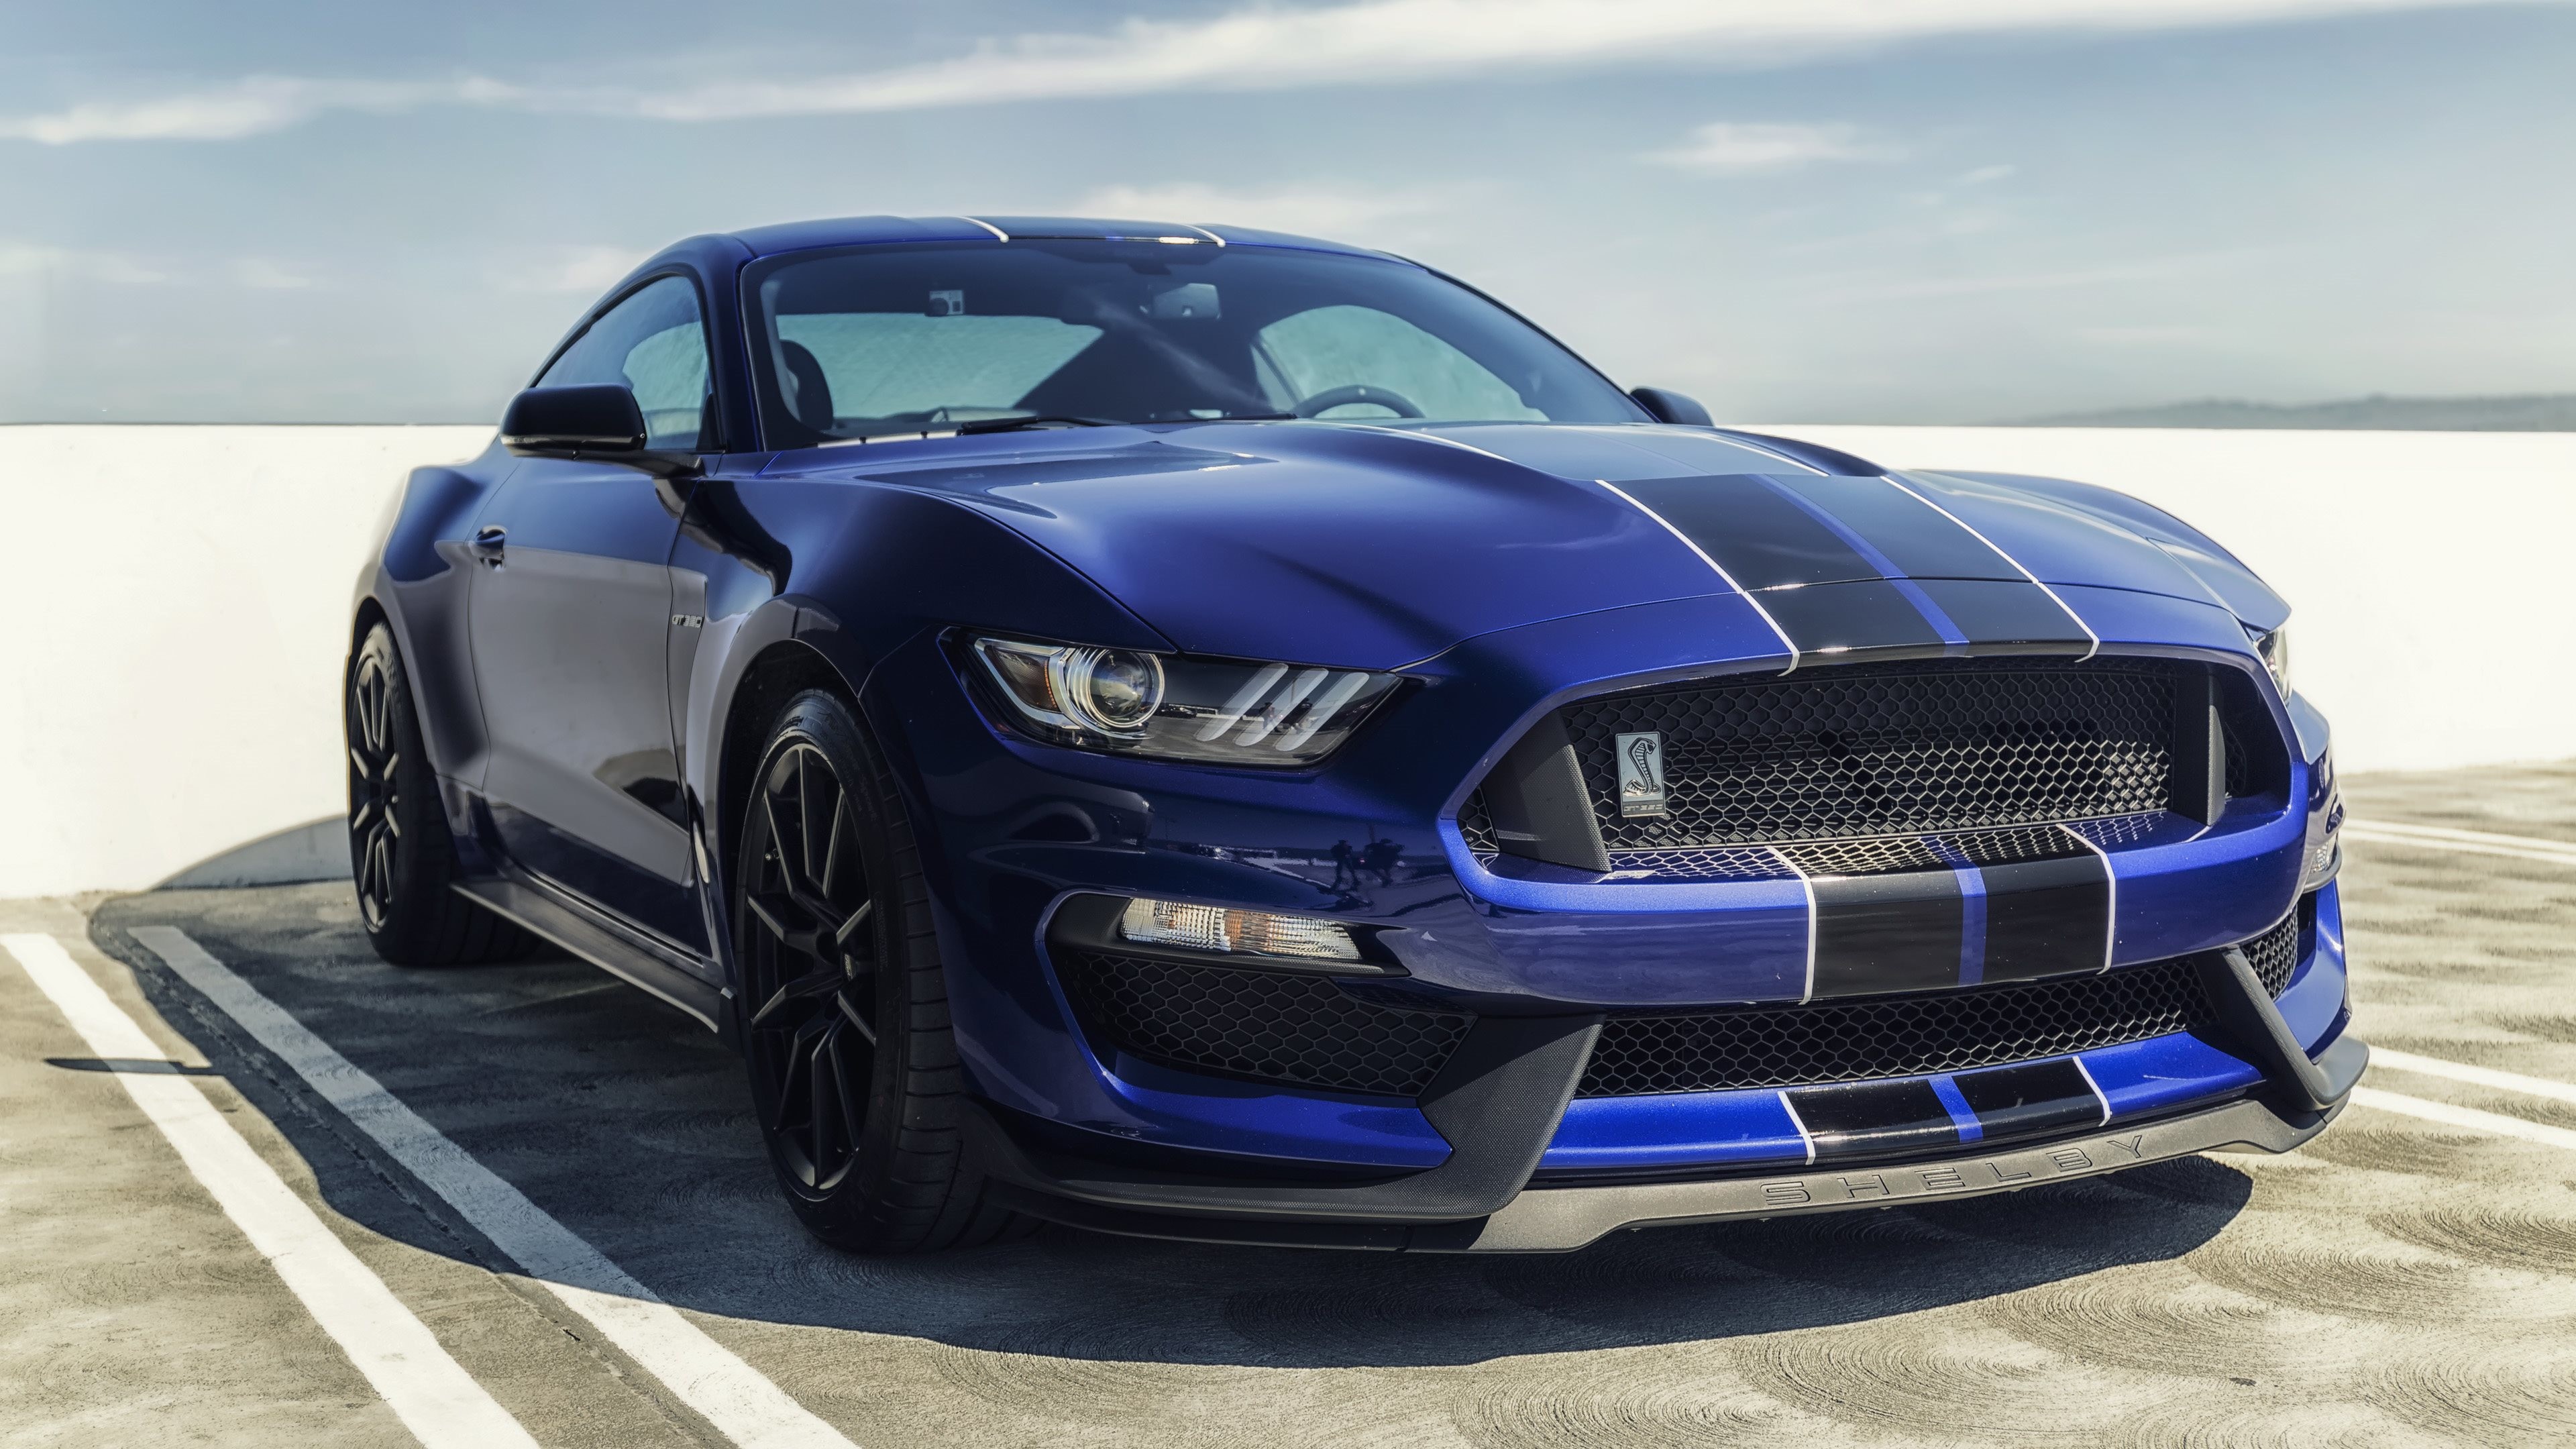 3840x2160 ford mustang gt350 wallpaper ford mustang shelby gt350 blue mustang sports  cars 4k widescreen wallpaper -